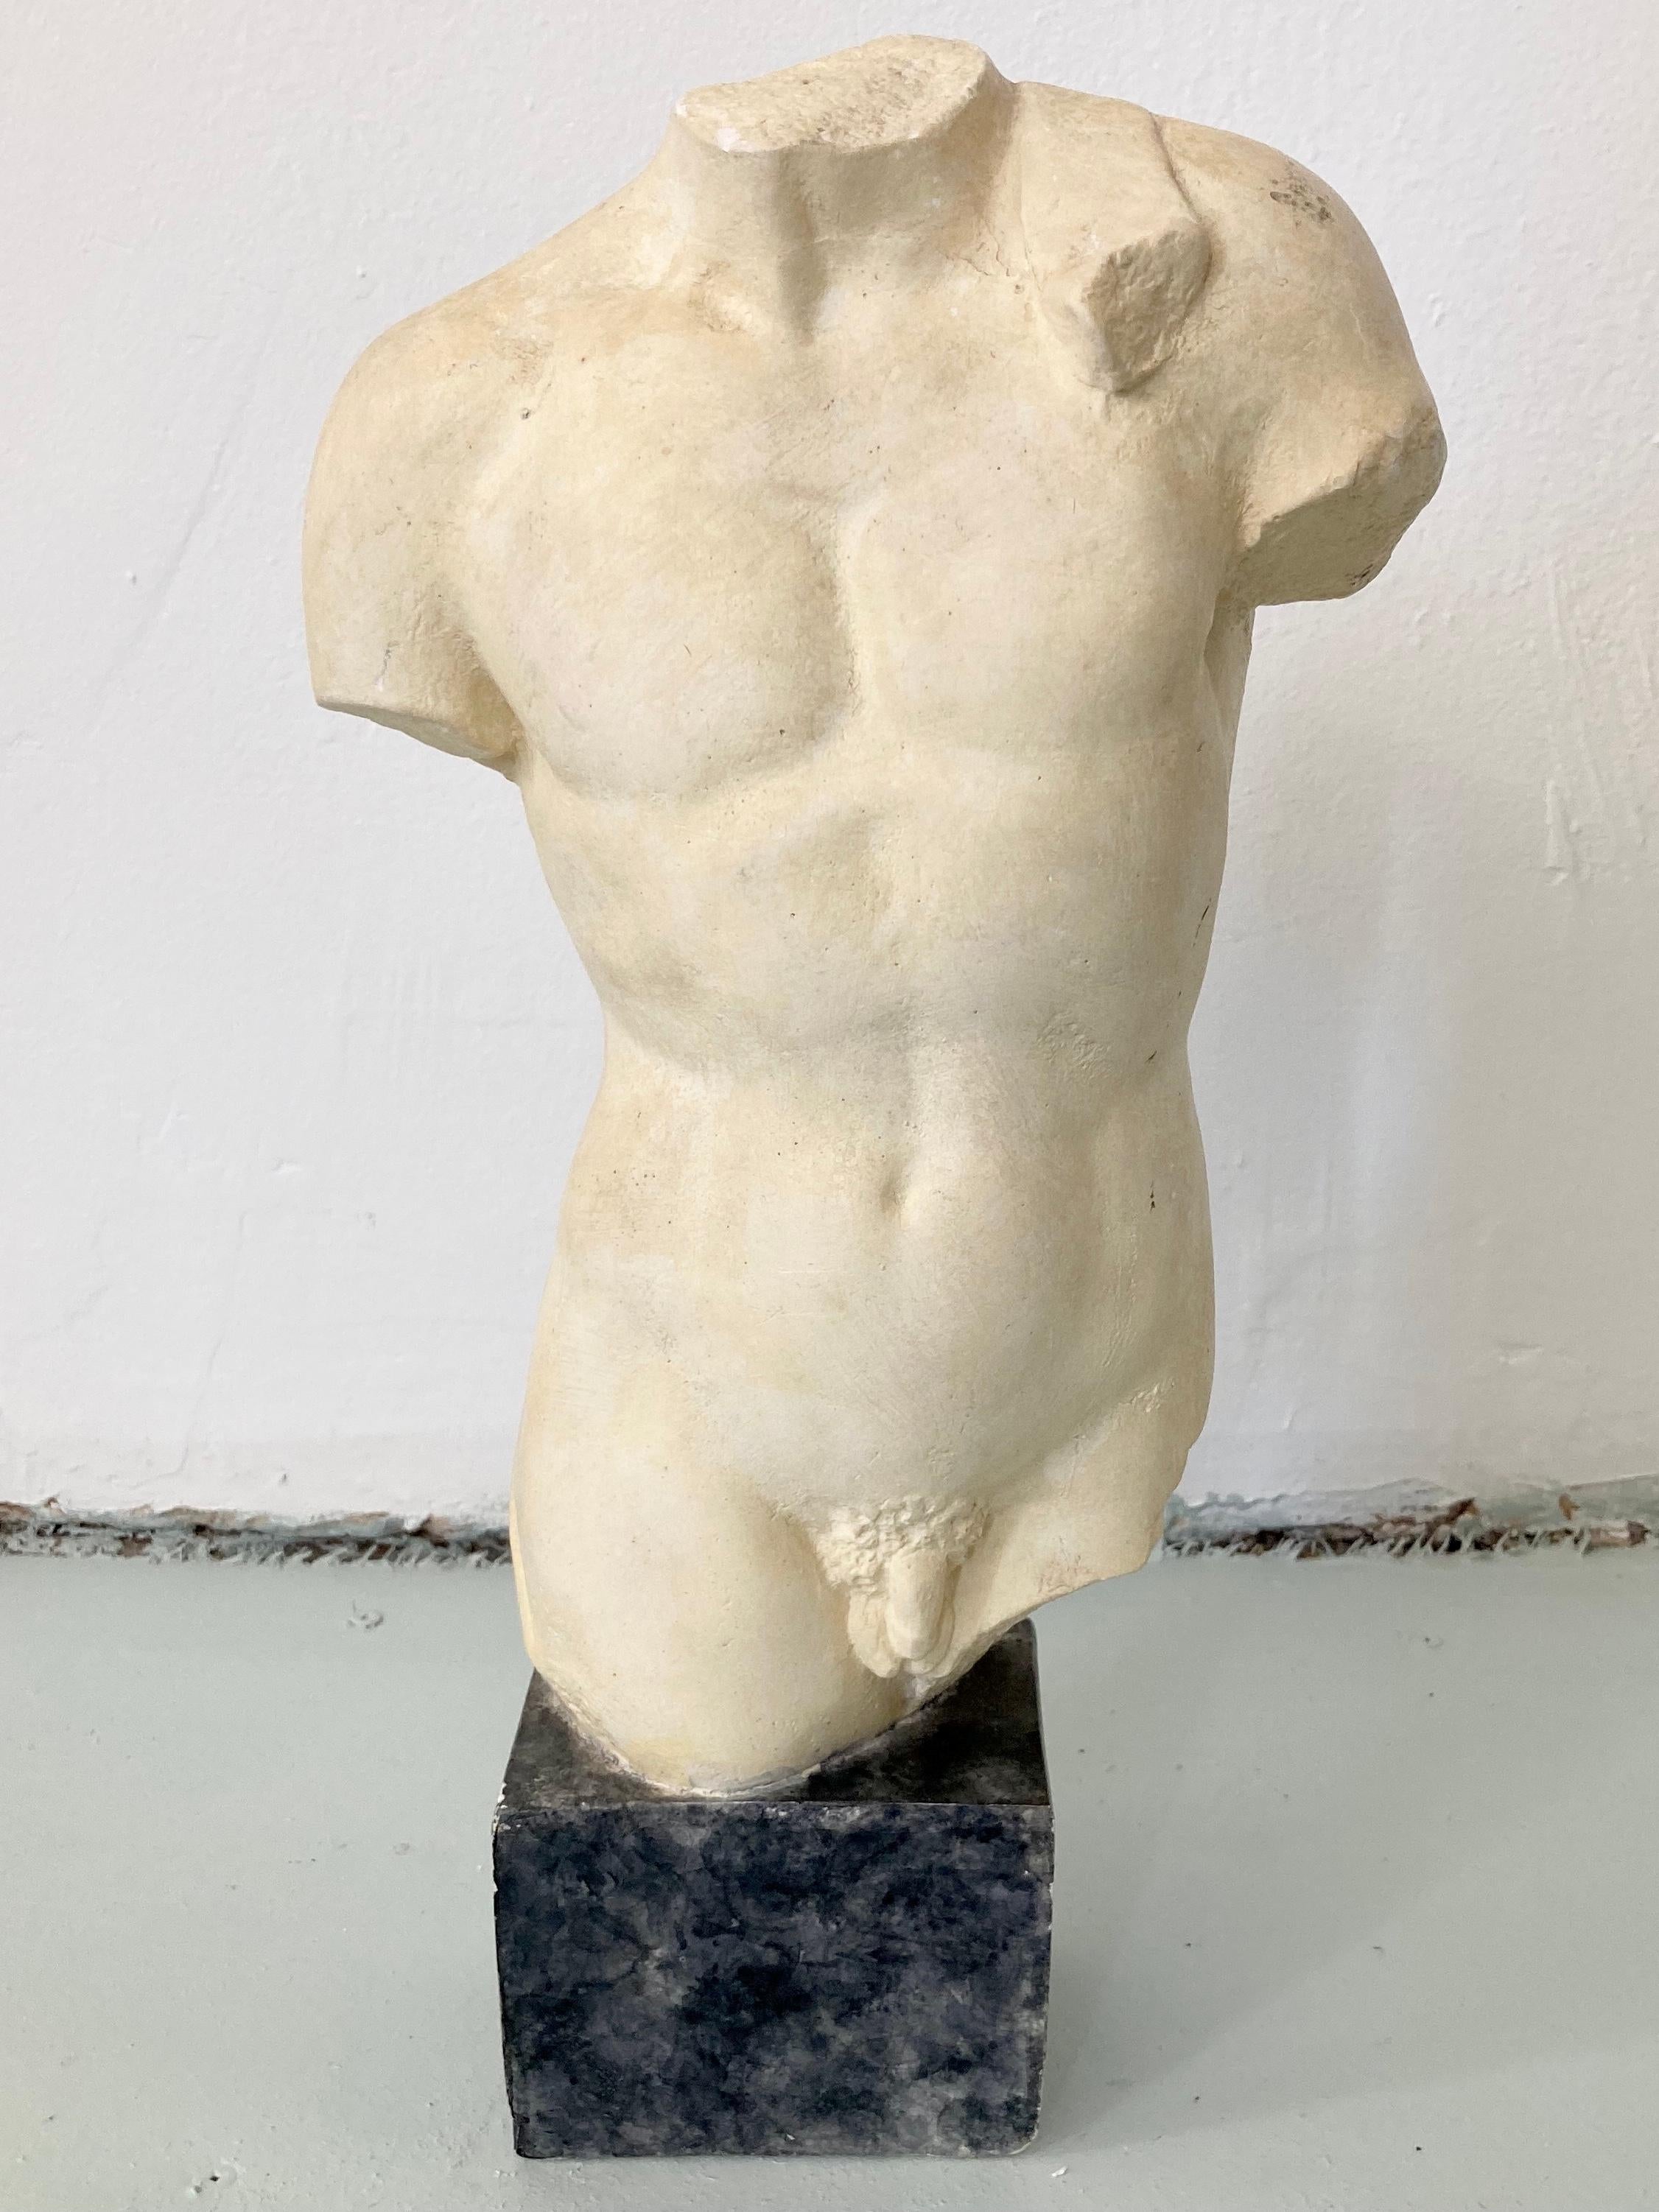 Classically sculpture of a male body on a base. Great addition to your architectural interiors. Plaster form with original finish dome wear for its age that adds to its character.